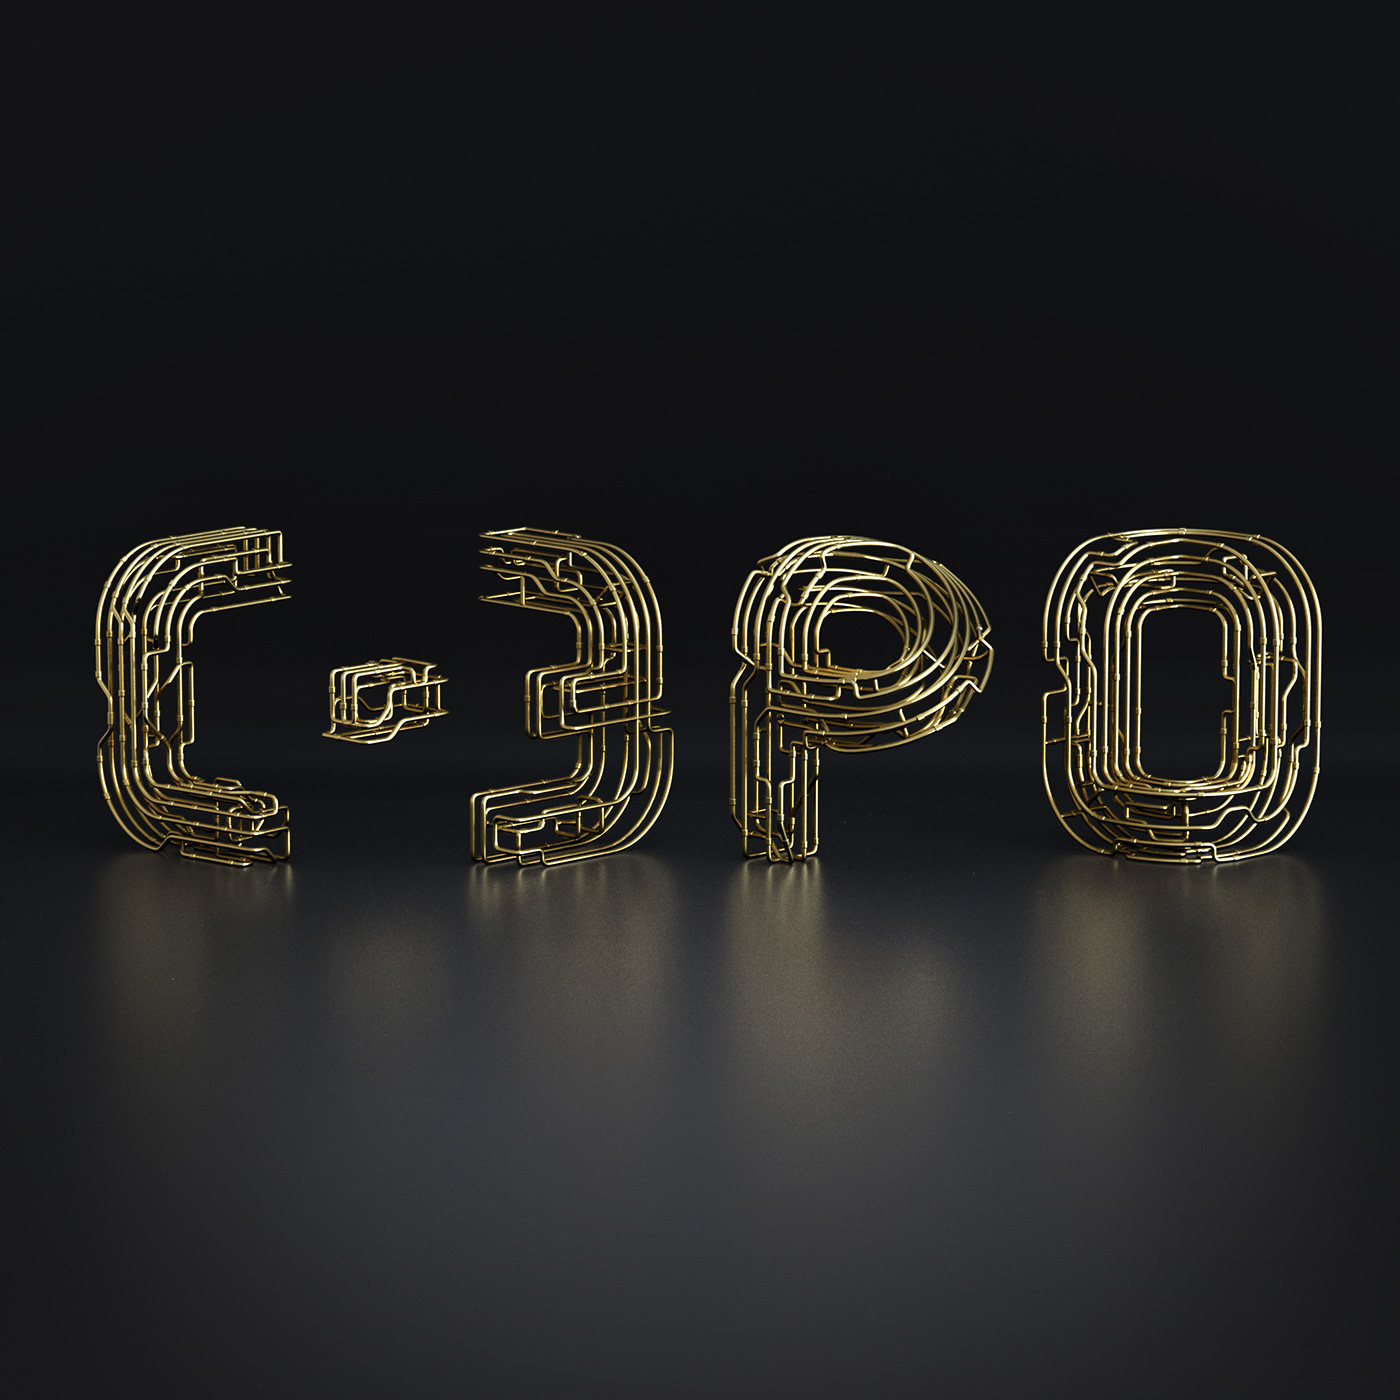 typography   design star wars 3D typography type copper Pypes  